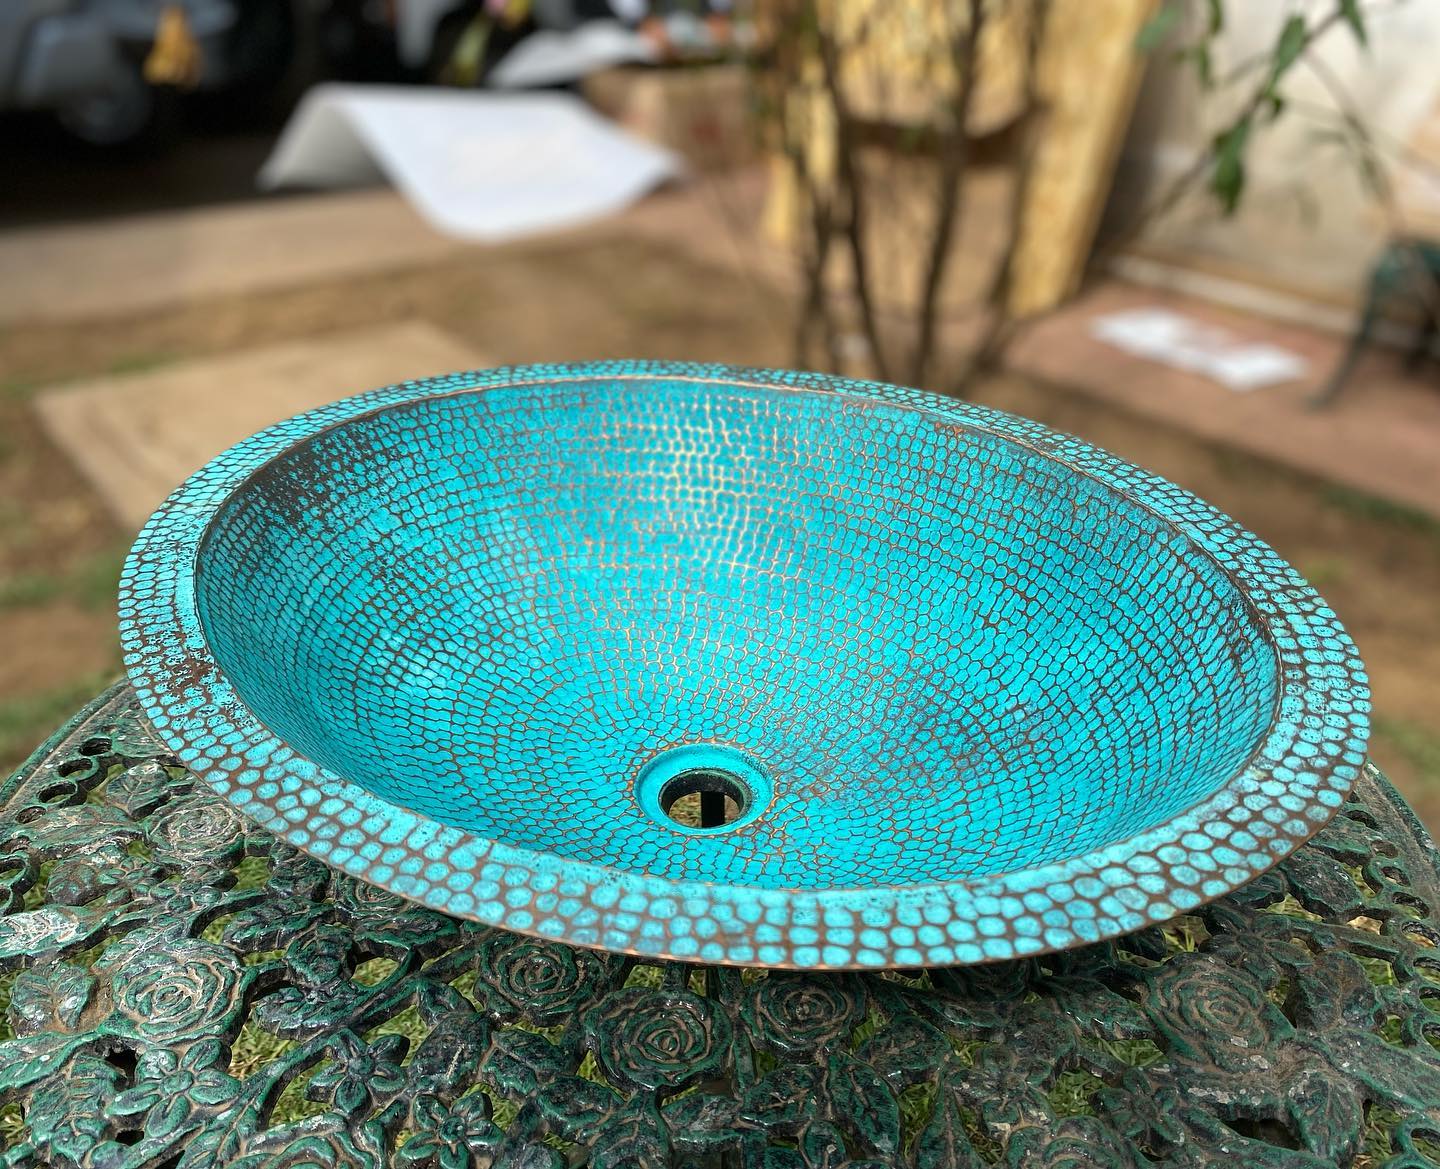 Antique Turquoise Weathered Bathroom Sink Basin in Copper - Syera - Zayian